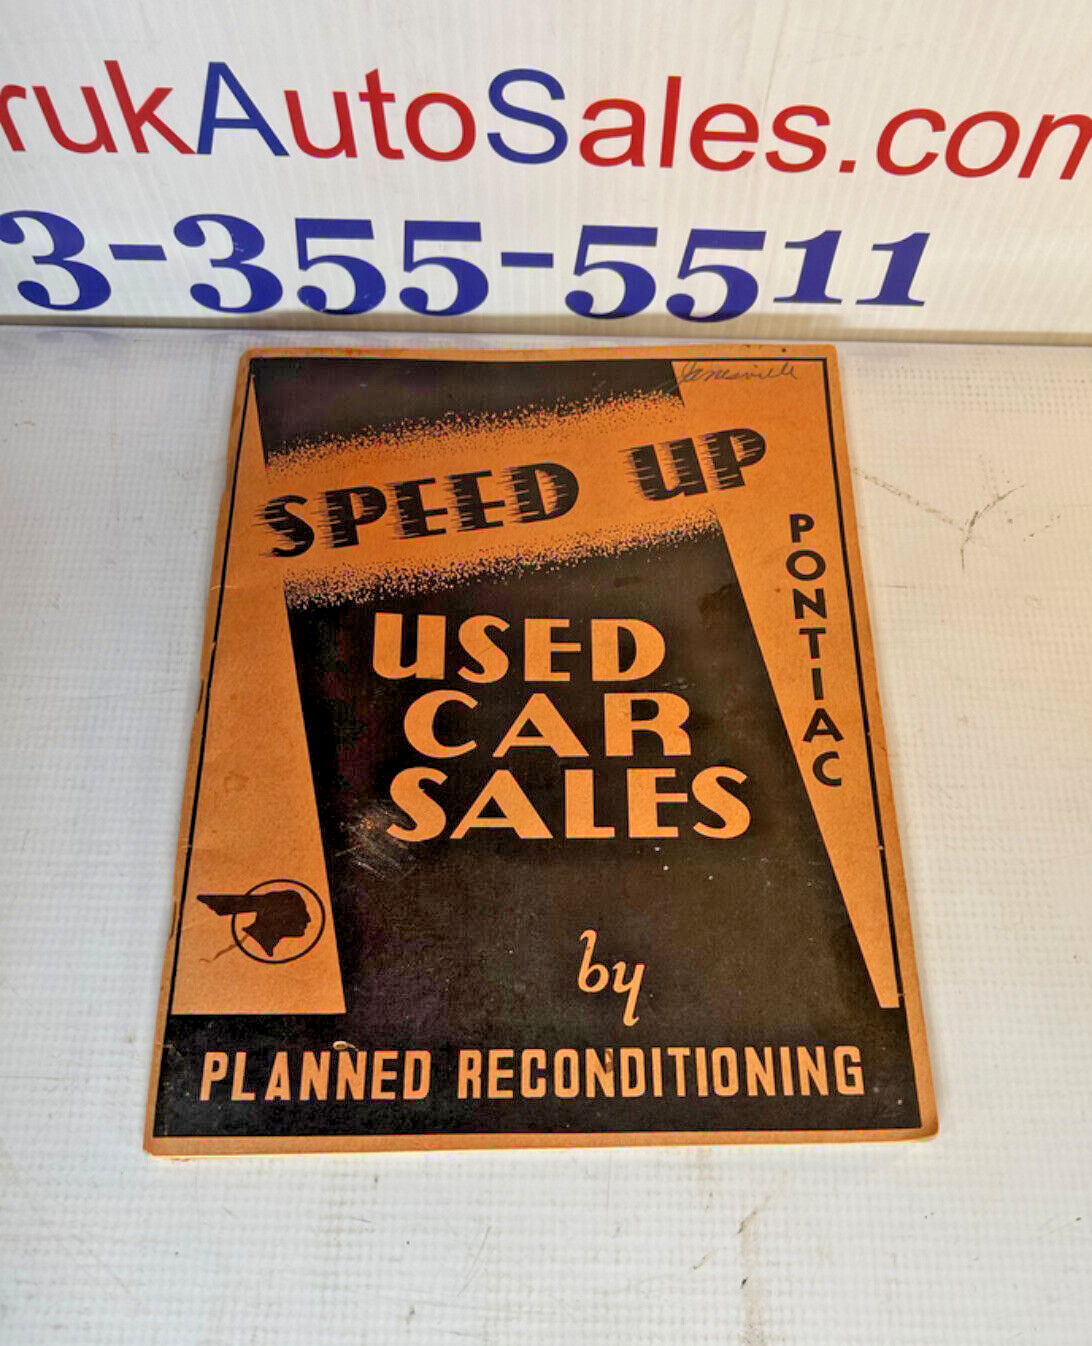 SPEED UP / USED CAR SALES by PLANNED RECONDITIONING